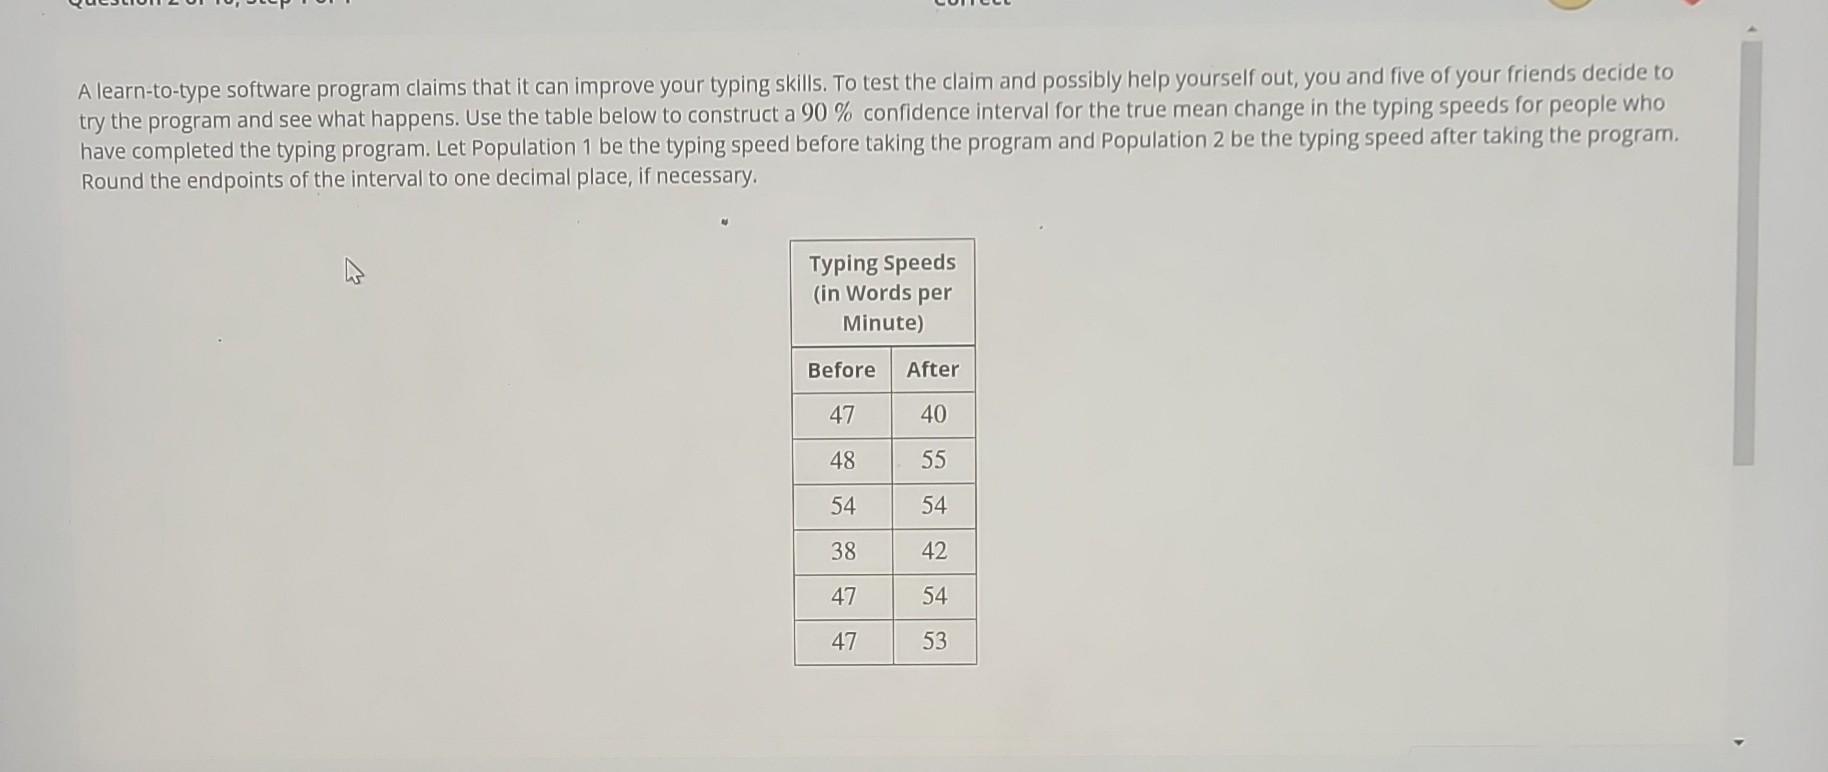 Help Your Students Improve Their Typing Speed!